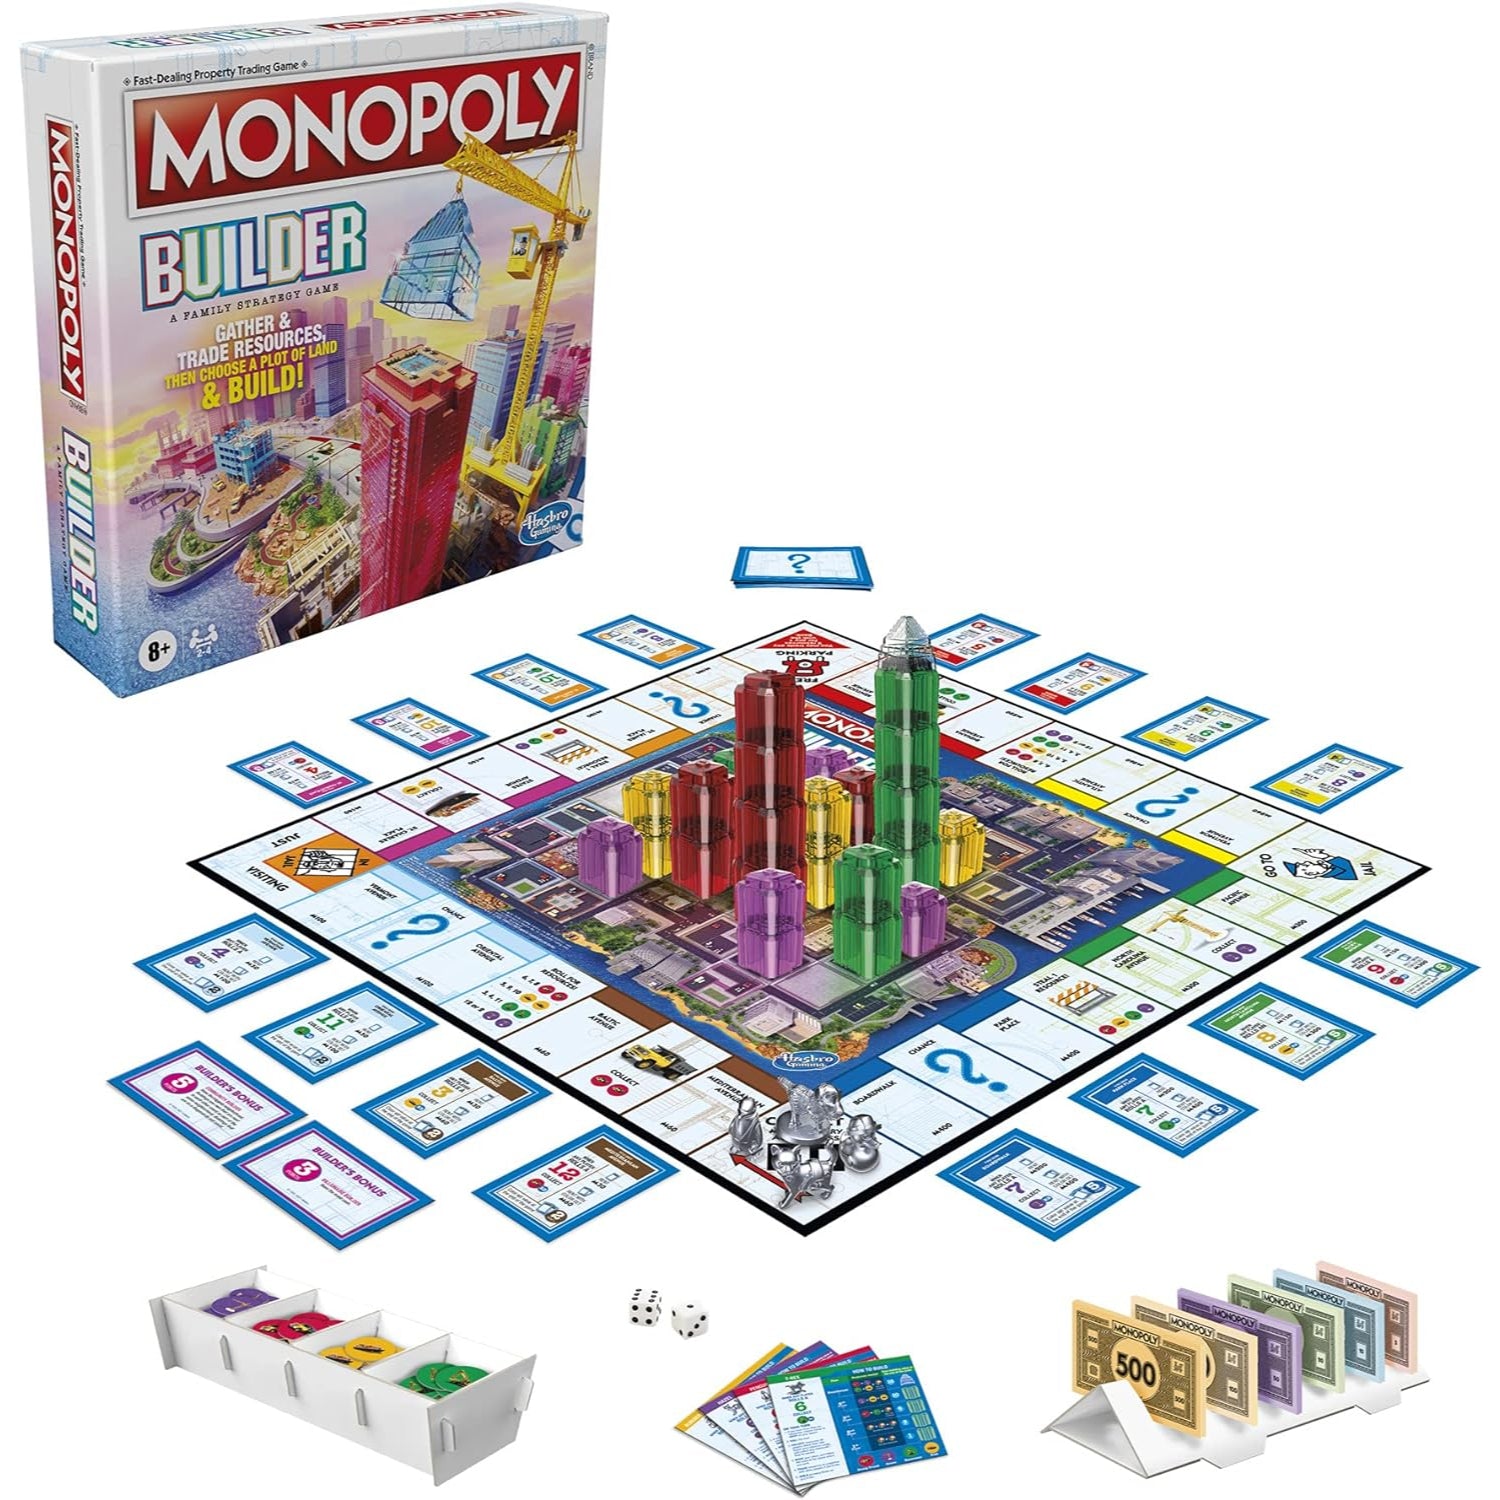 Monopoly Builder Board Game for Kids and Adults